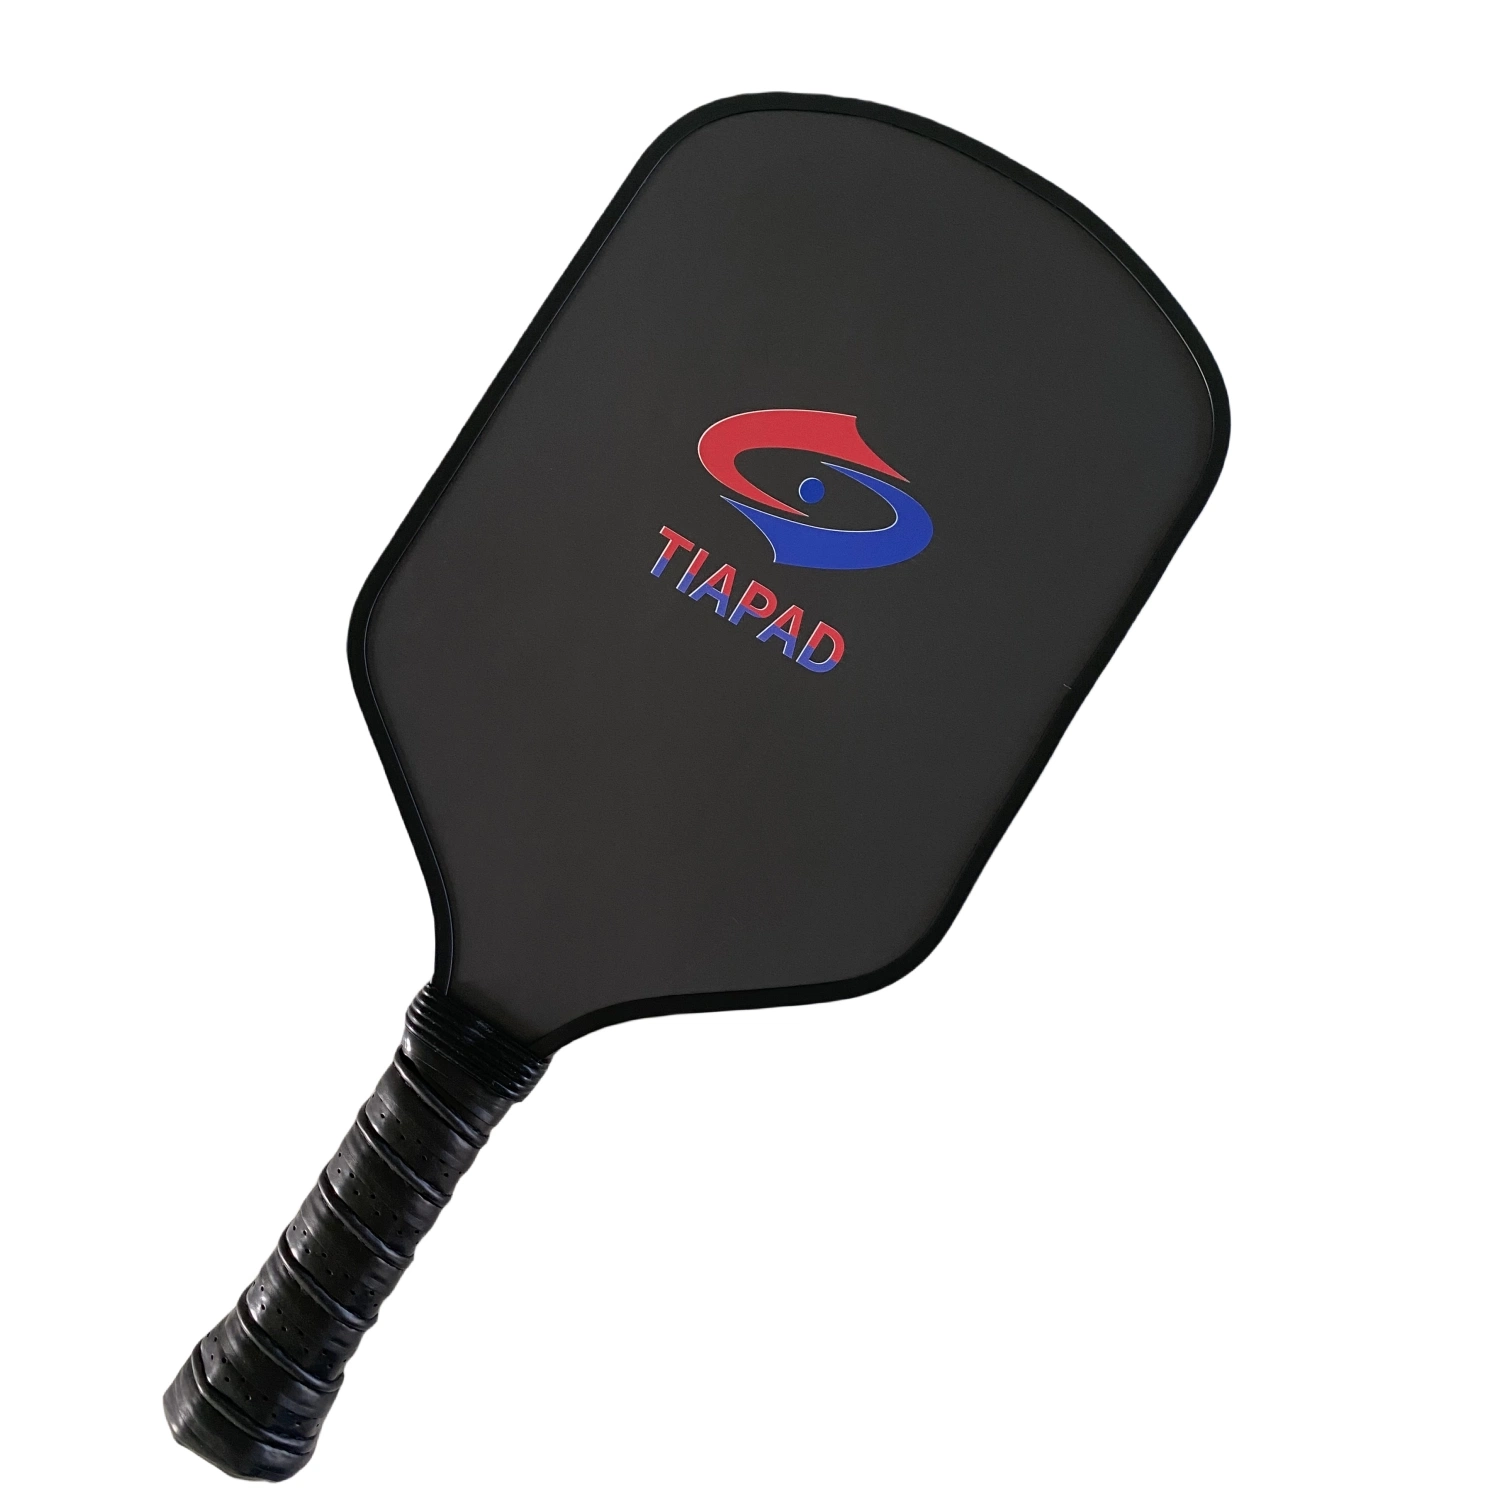 Professional Manufacture Sporting Goods Raw Carbon Fiber Pickleball Paddles Customize Carbon Fabric Textured Paddle Thermoformed Carbon Fiber Pickleball Paddle